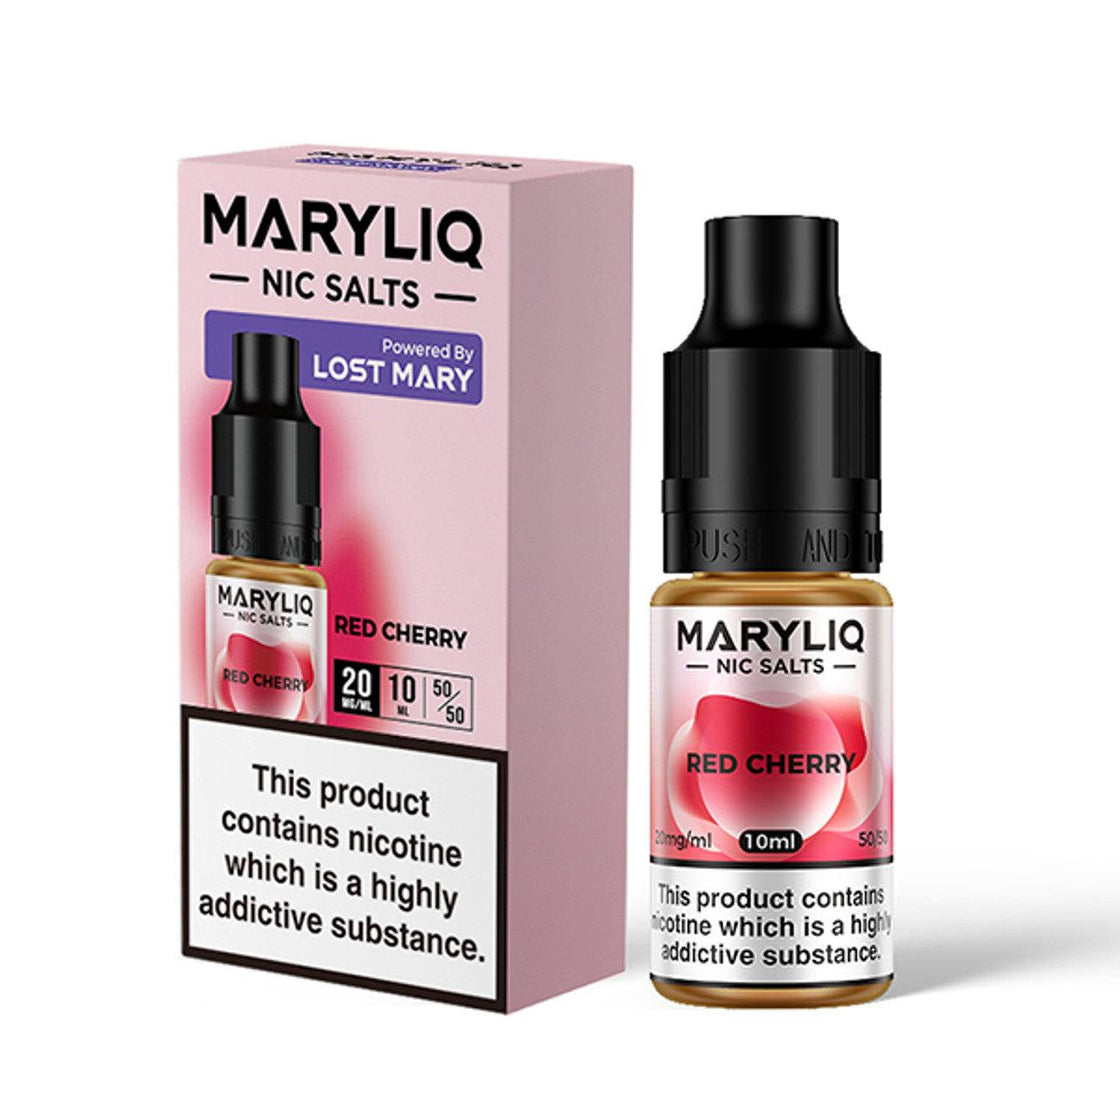 RED CHERRY 10ML E-LIQUID NICOTINE SALT BY MARYLIQ - LOST MARY - Vapeslough